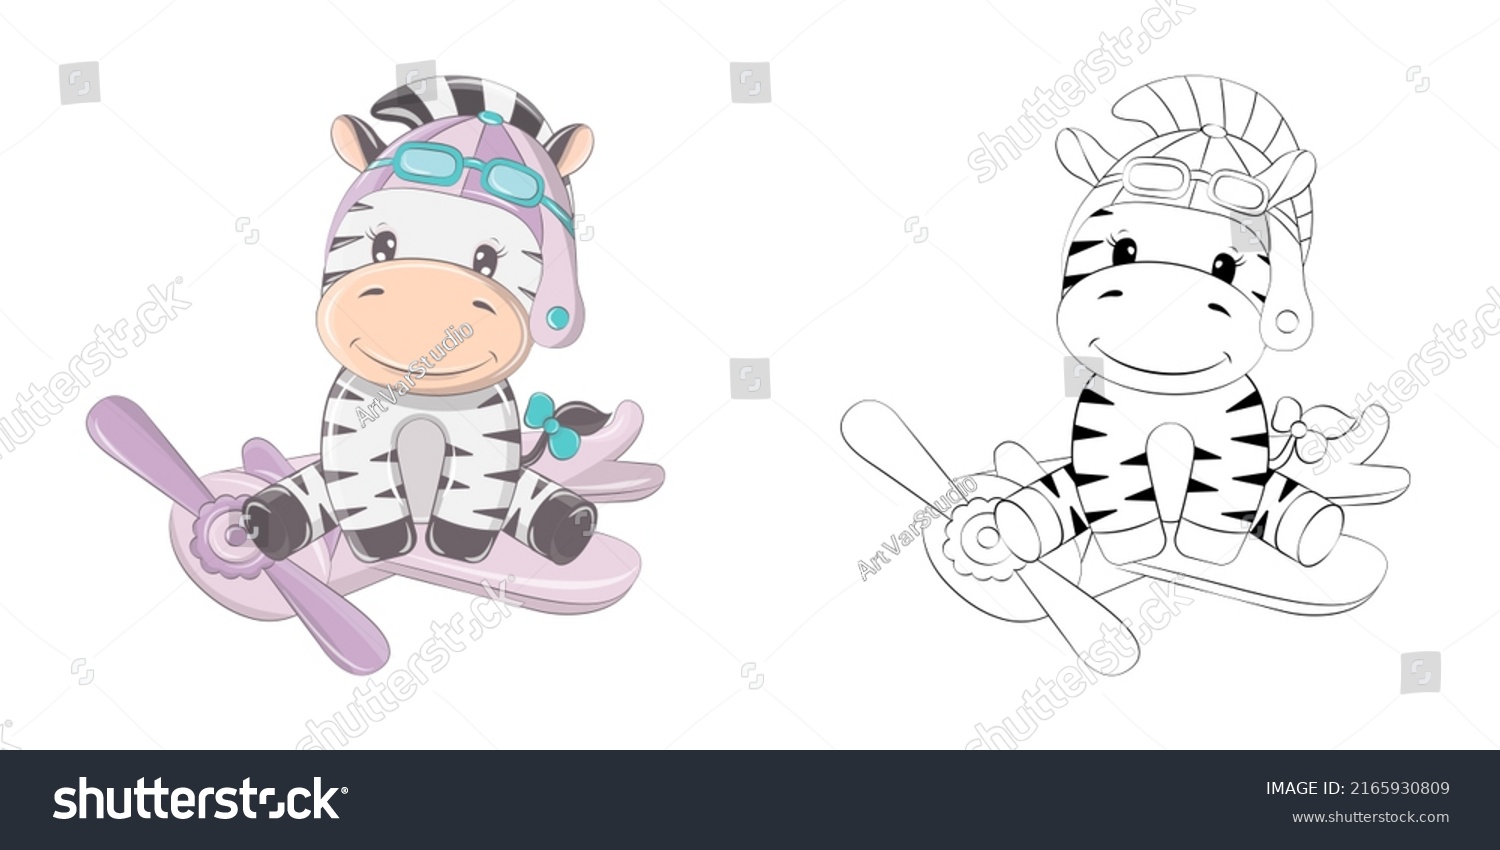 SVG of Cute Zebra Clipart Illustration and Black and White. Funny Clip Art Zebra Pilot on a Plane. Vector Illustration of an Animal for Coloring Pages, Stickers, Baby Shower, Prints for Clothes.  svg